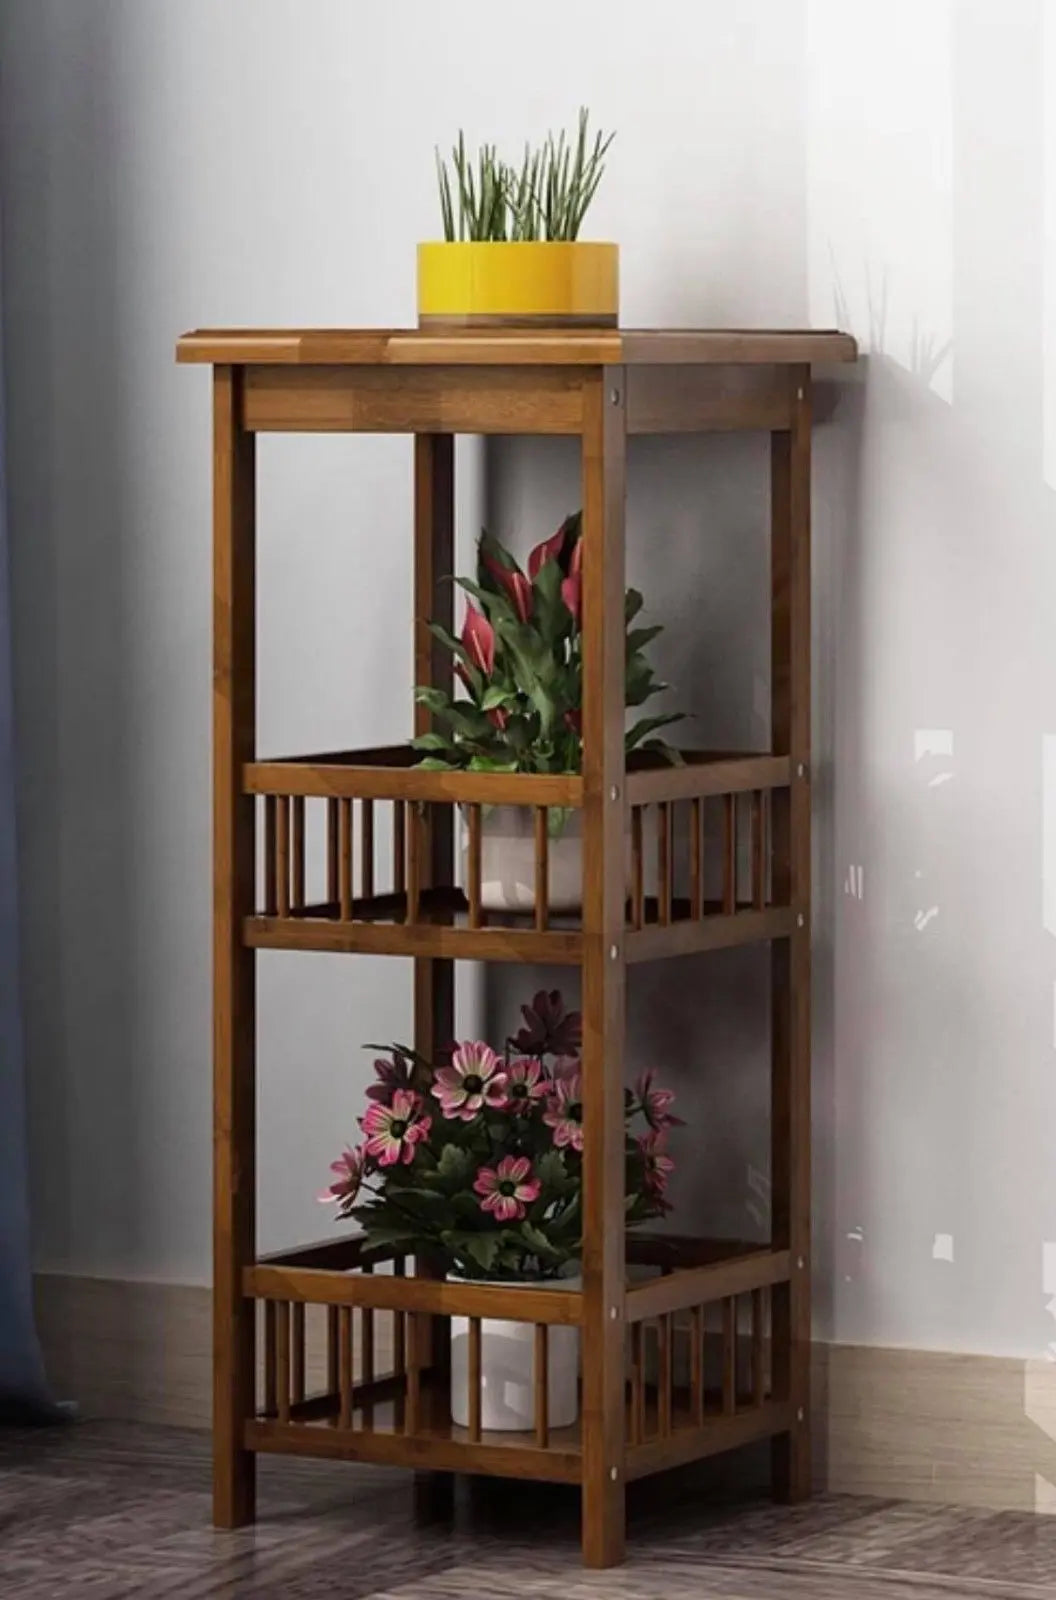 BAMBOO WOODEN SHELF SQUARE PLANT STAND MULTI TIER LADDER STORAGE MULTI USE everythingbamboo